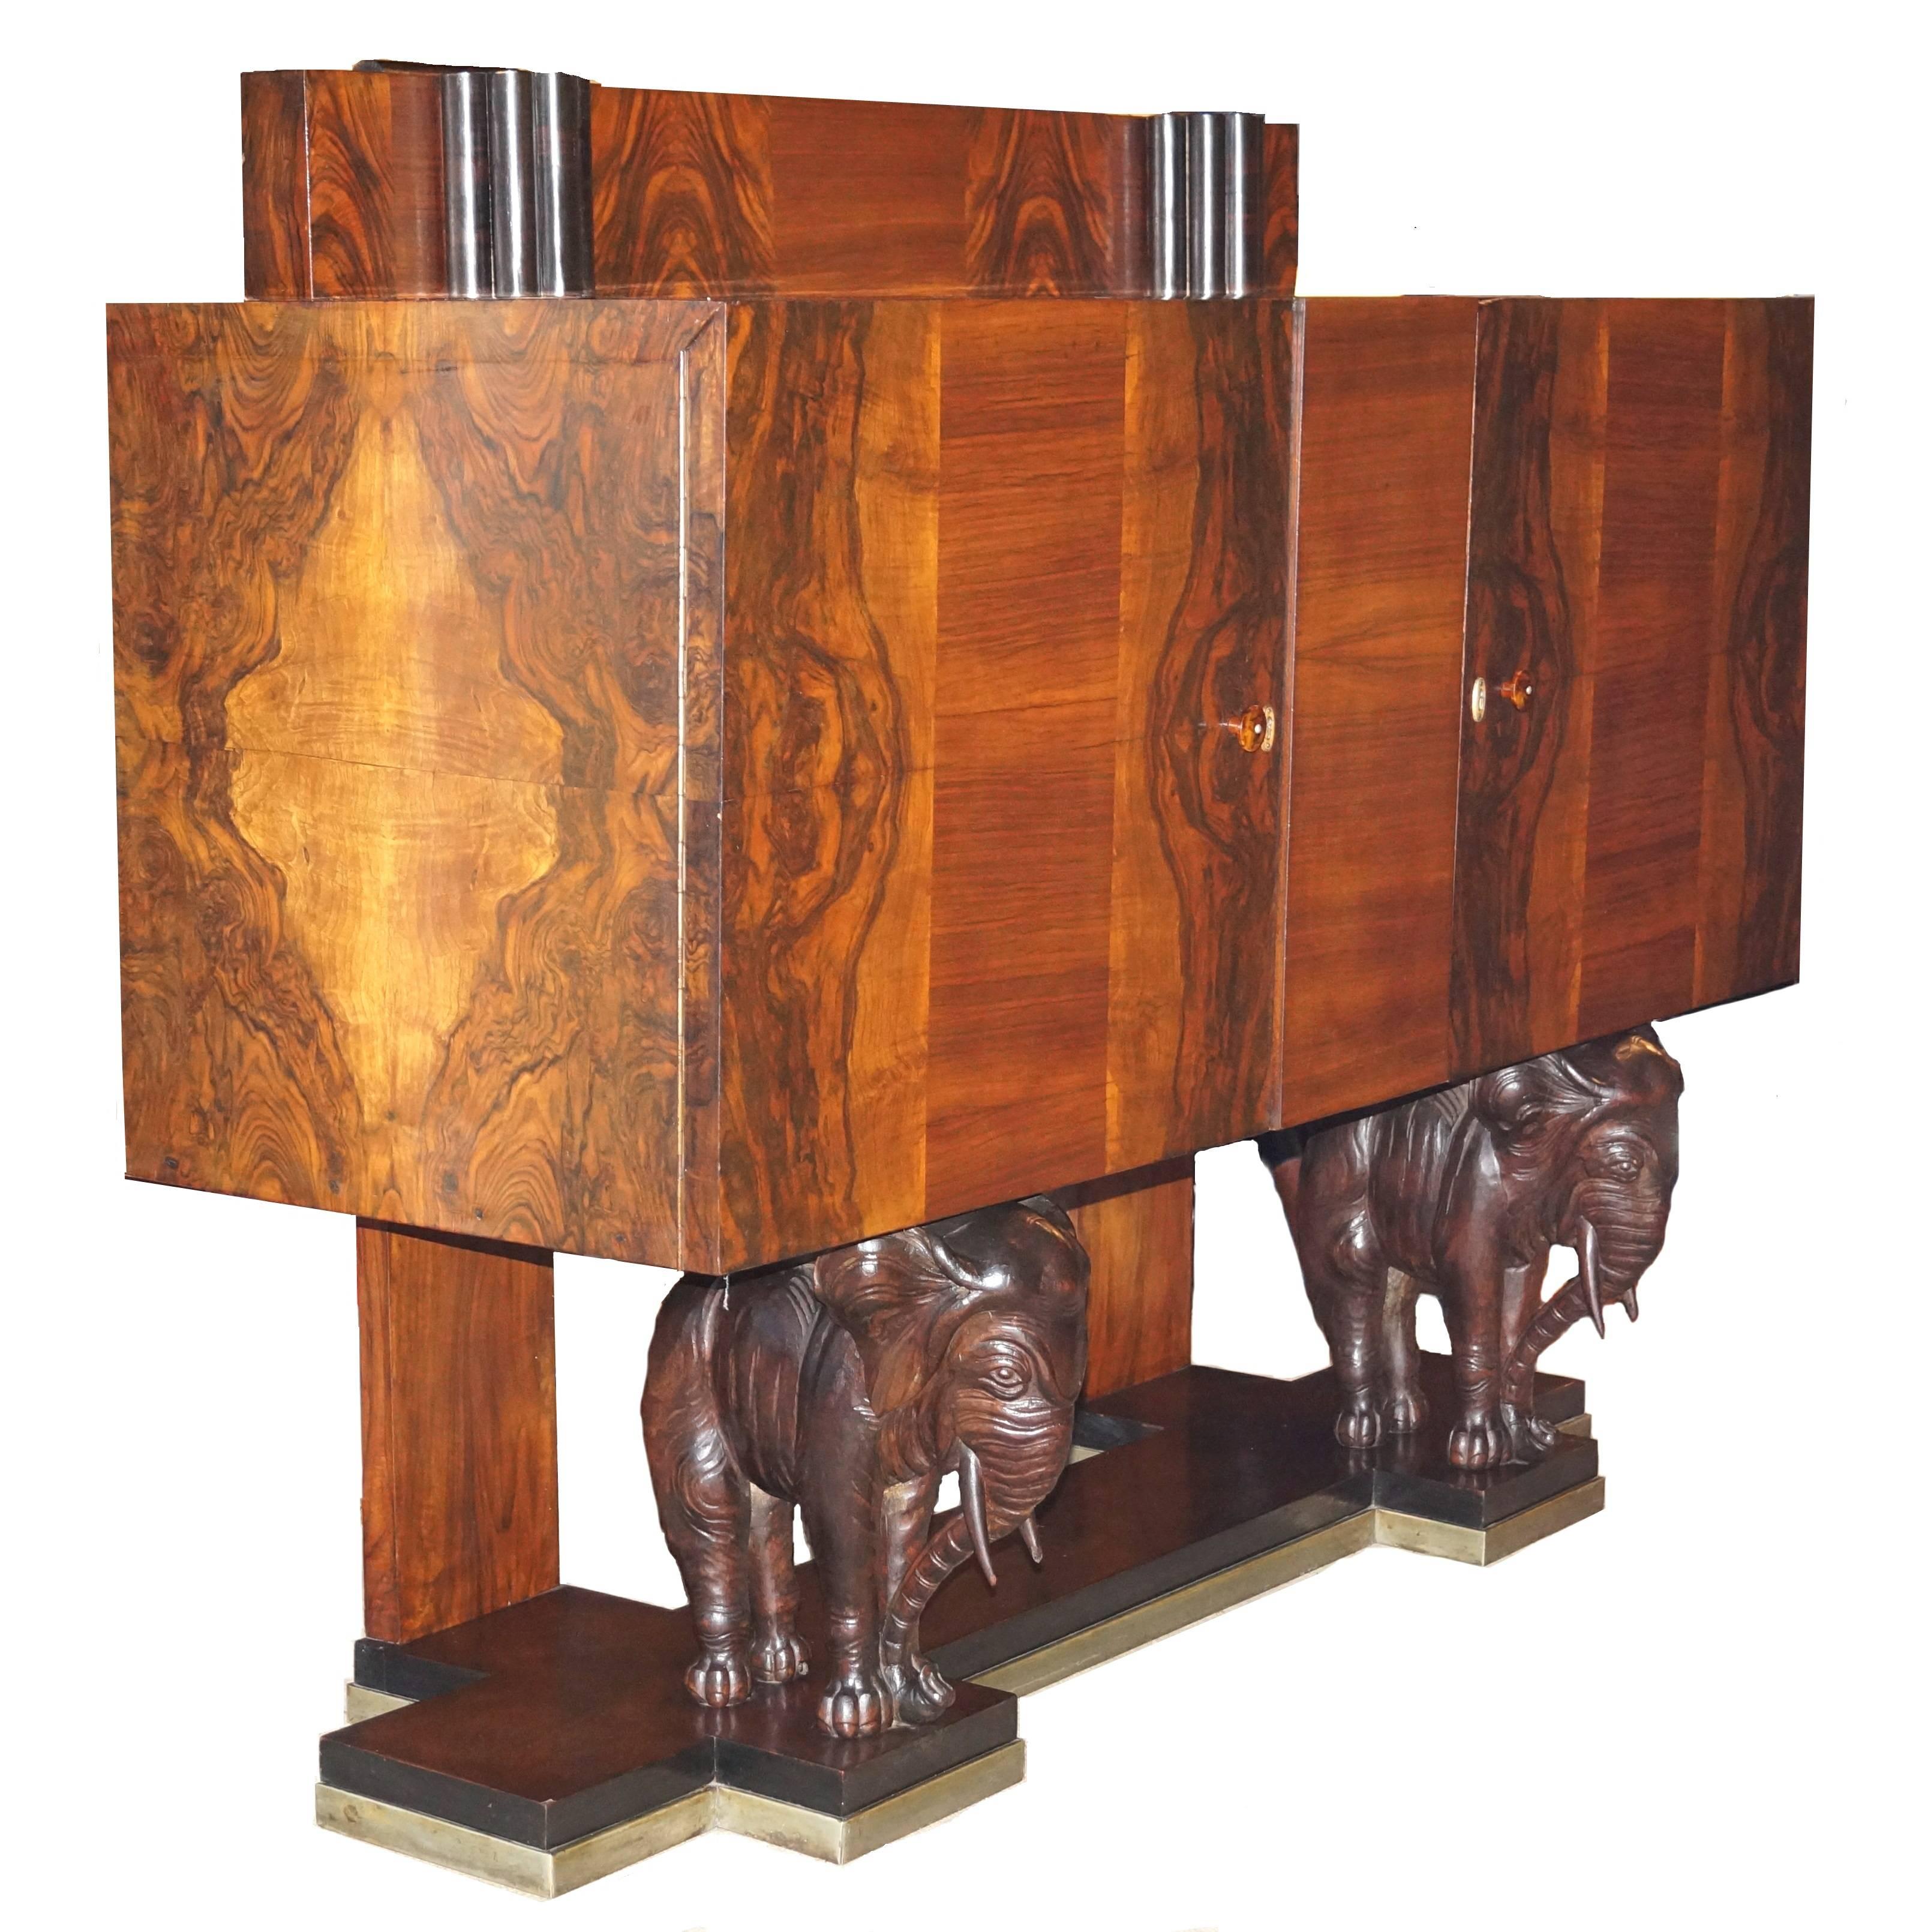 Carved elephant sideboard buffet credenza. Measures: Height of backslash is 47 1/2". Height to top of cabinet is 41 5/8".